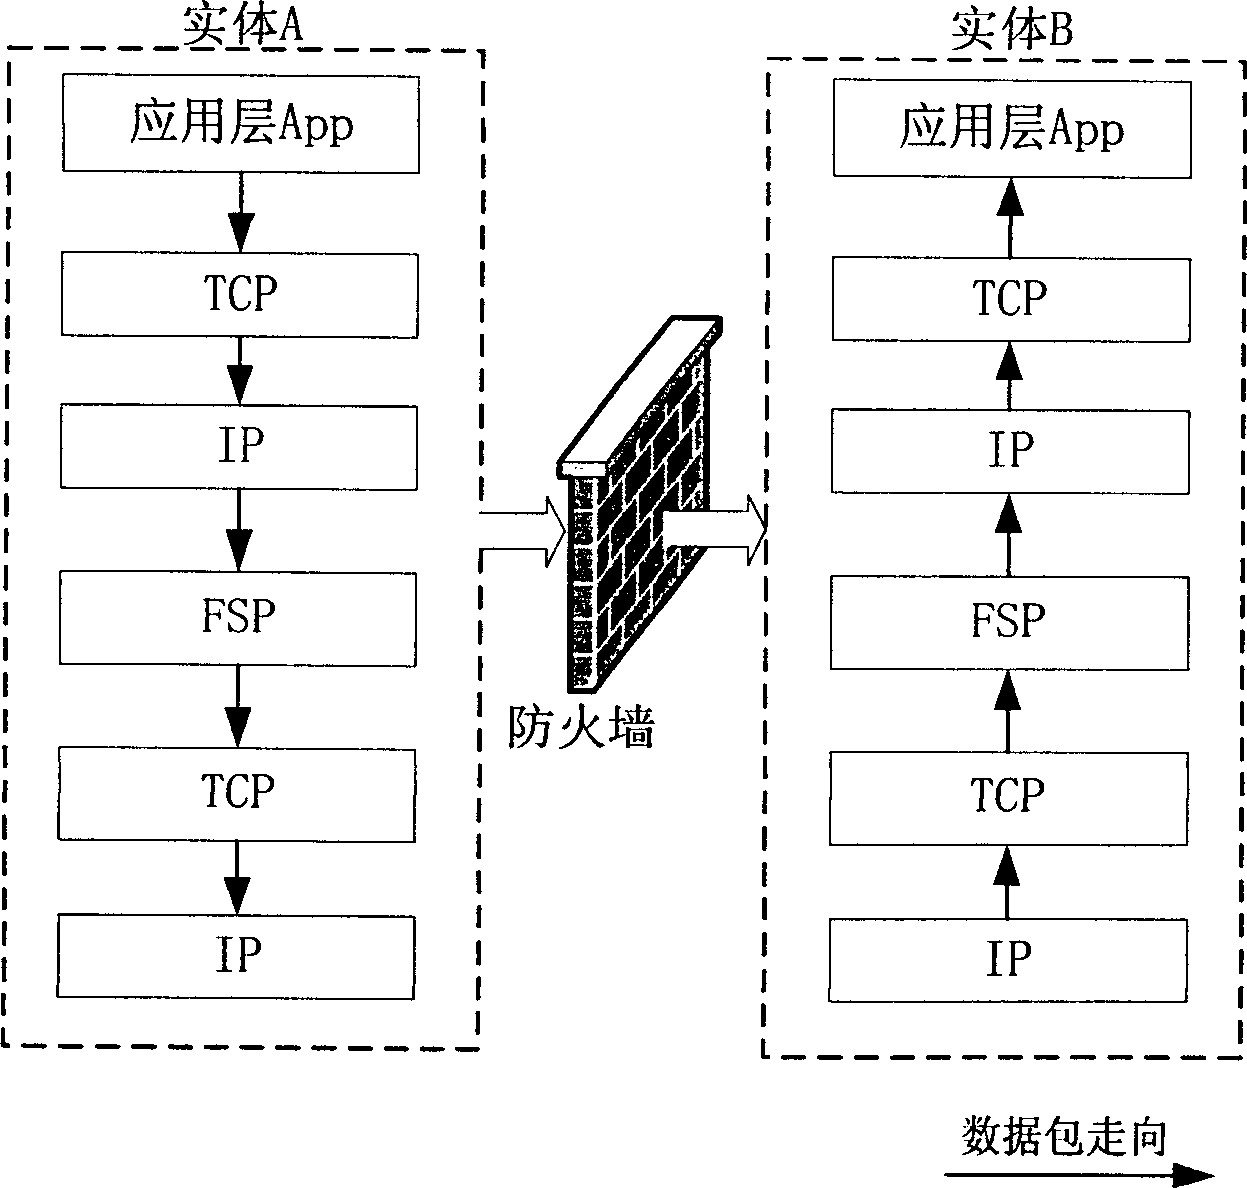 Method for realizing peer-to-peer network system architecture